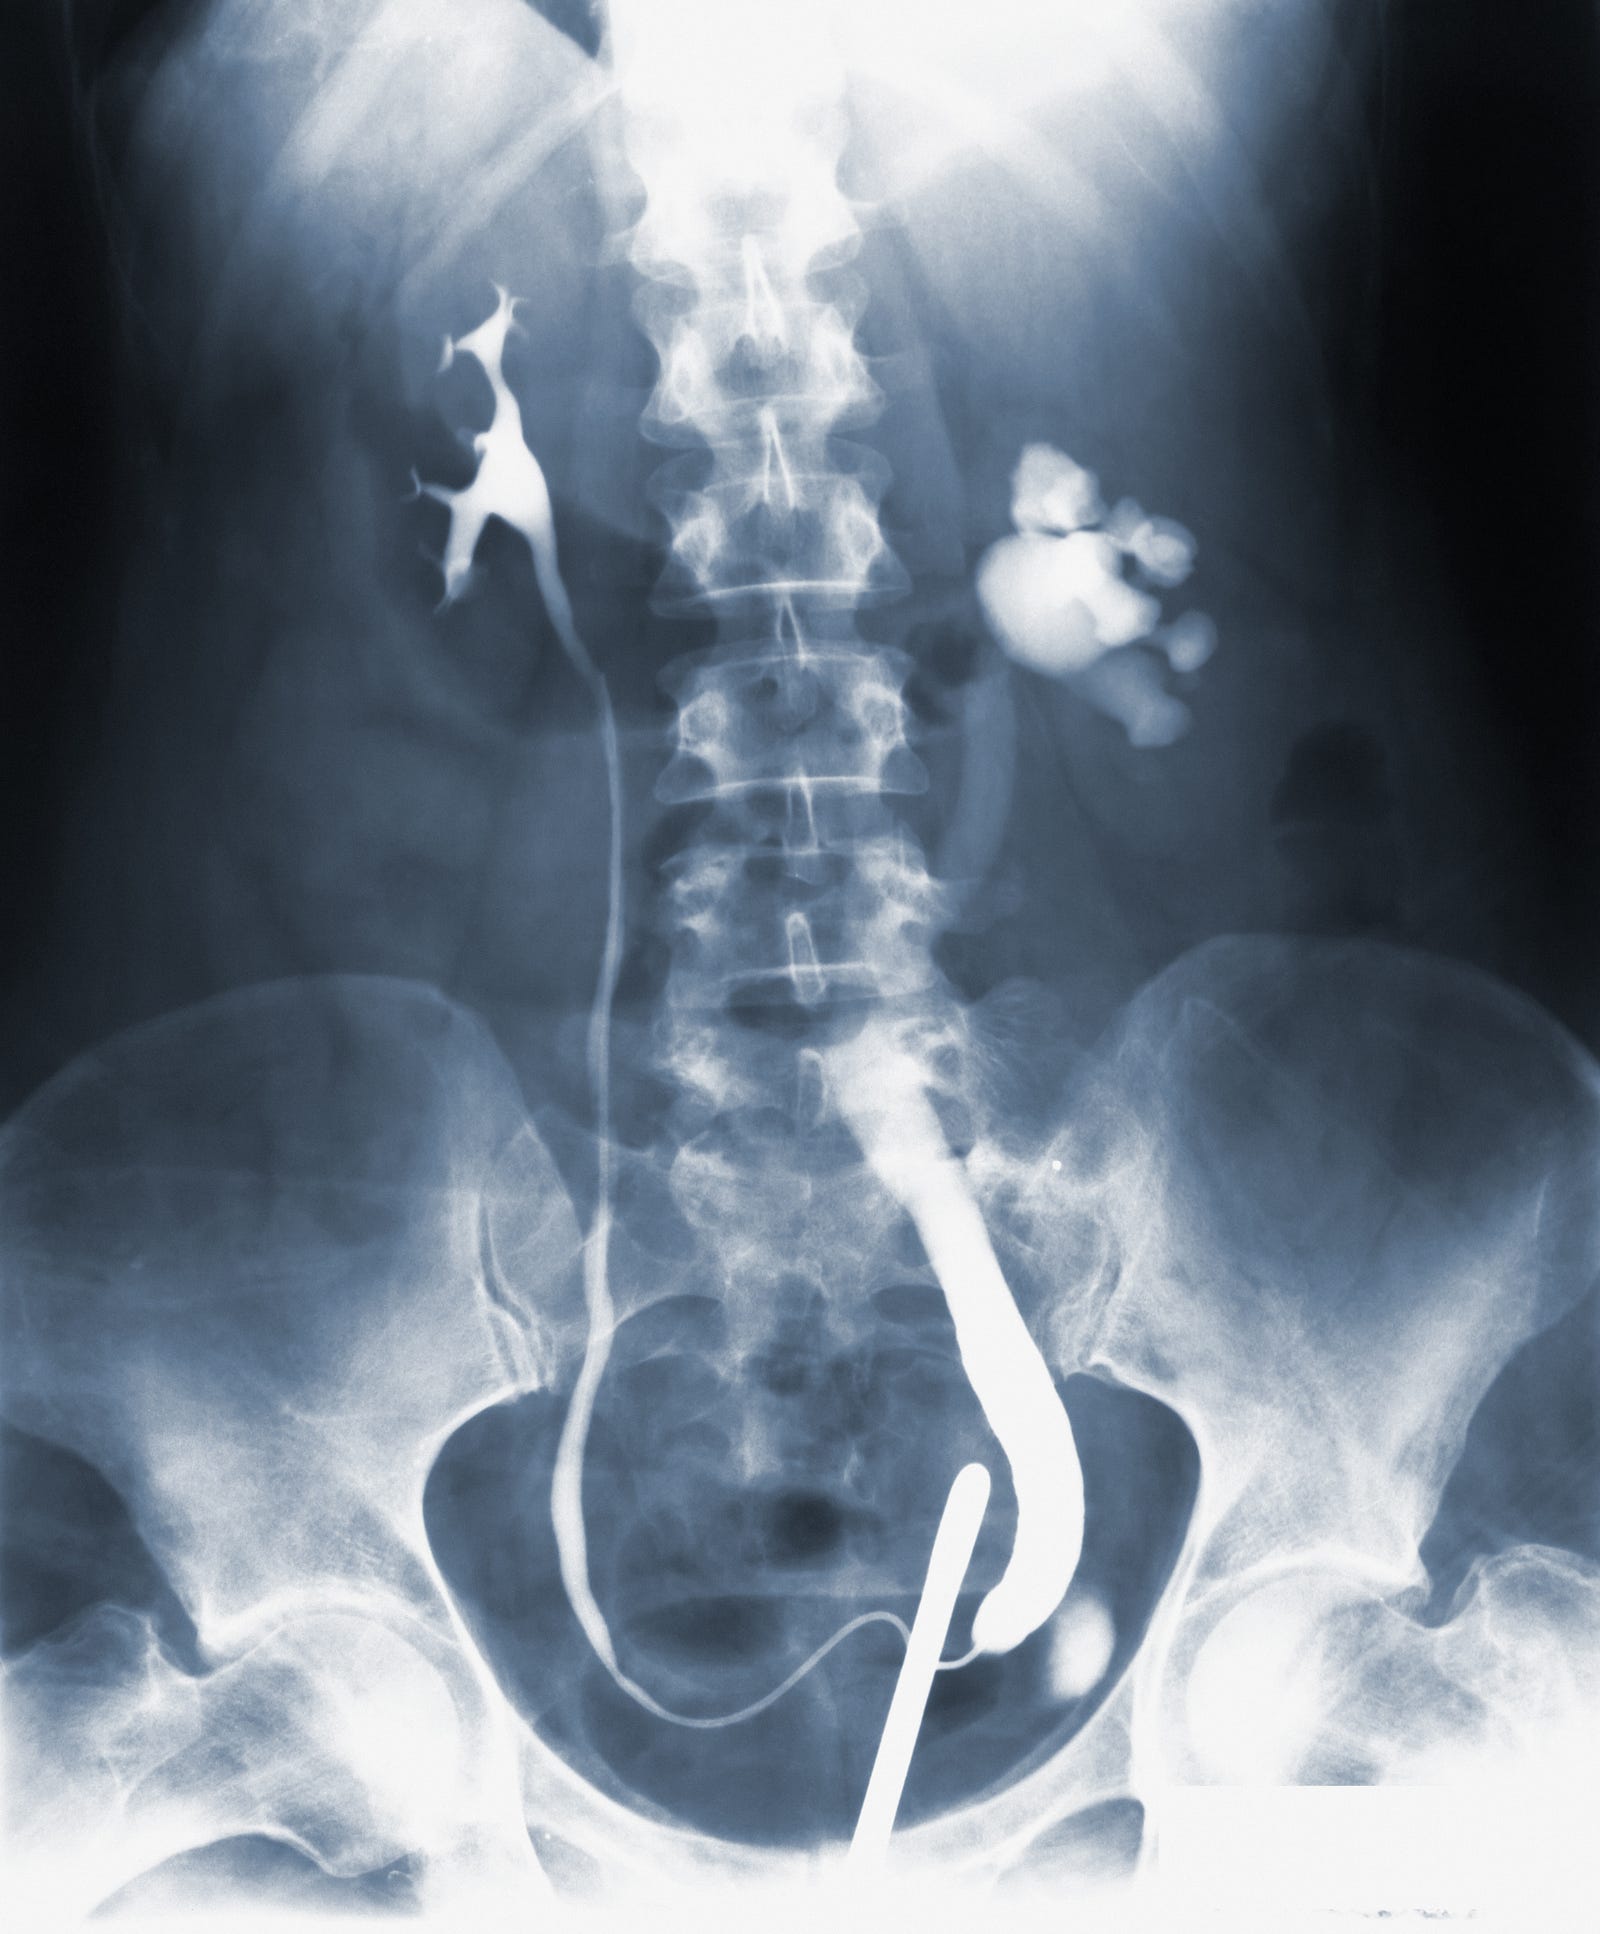 An X-ray image of the abdomen and pelvis, with contrast material flowing from the kidneys and down the ereters into the pelvis. Imagine your kidneys like a trusty water purifier in your house. They constantly filter your blood, removing waste and extra fluids like unwanted guests in your system.